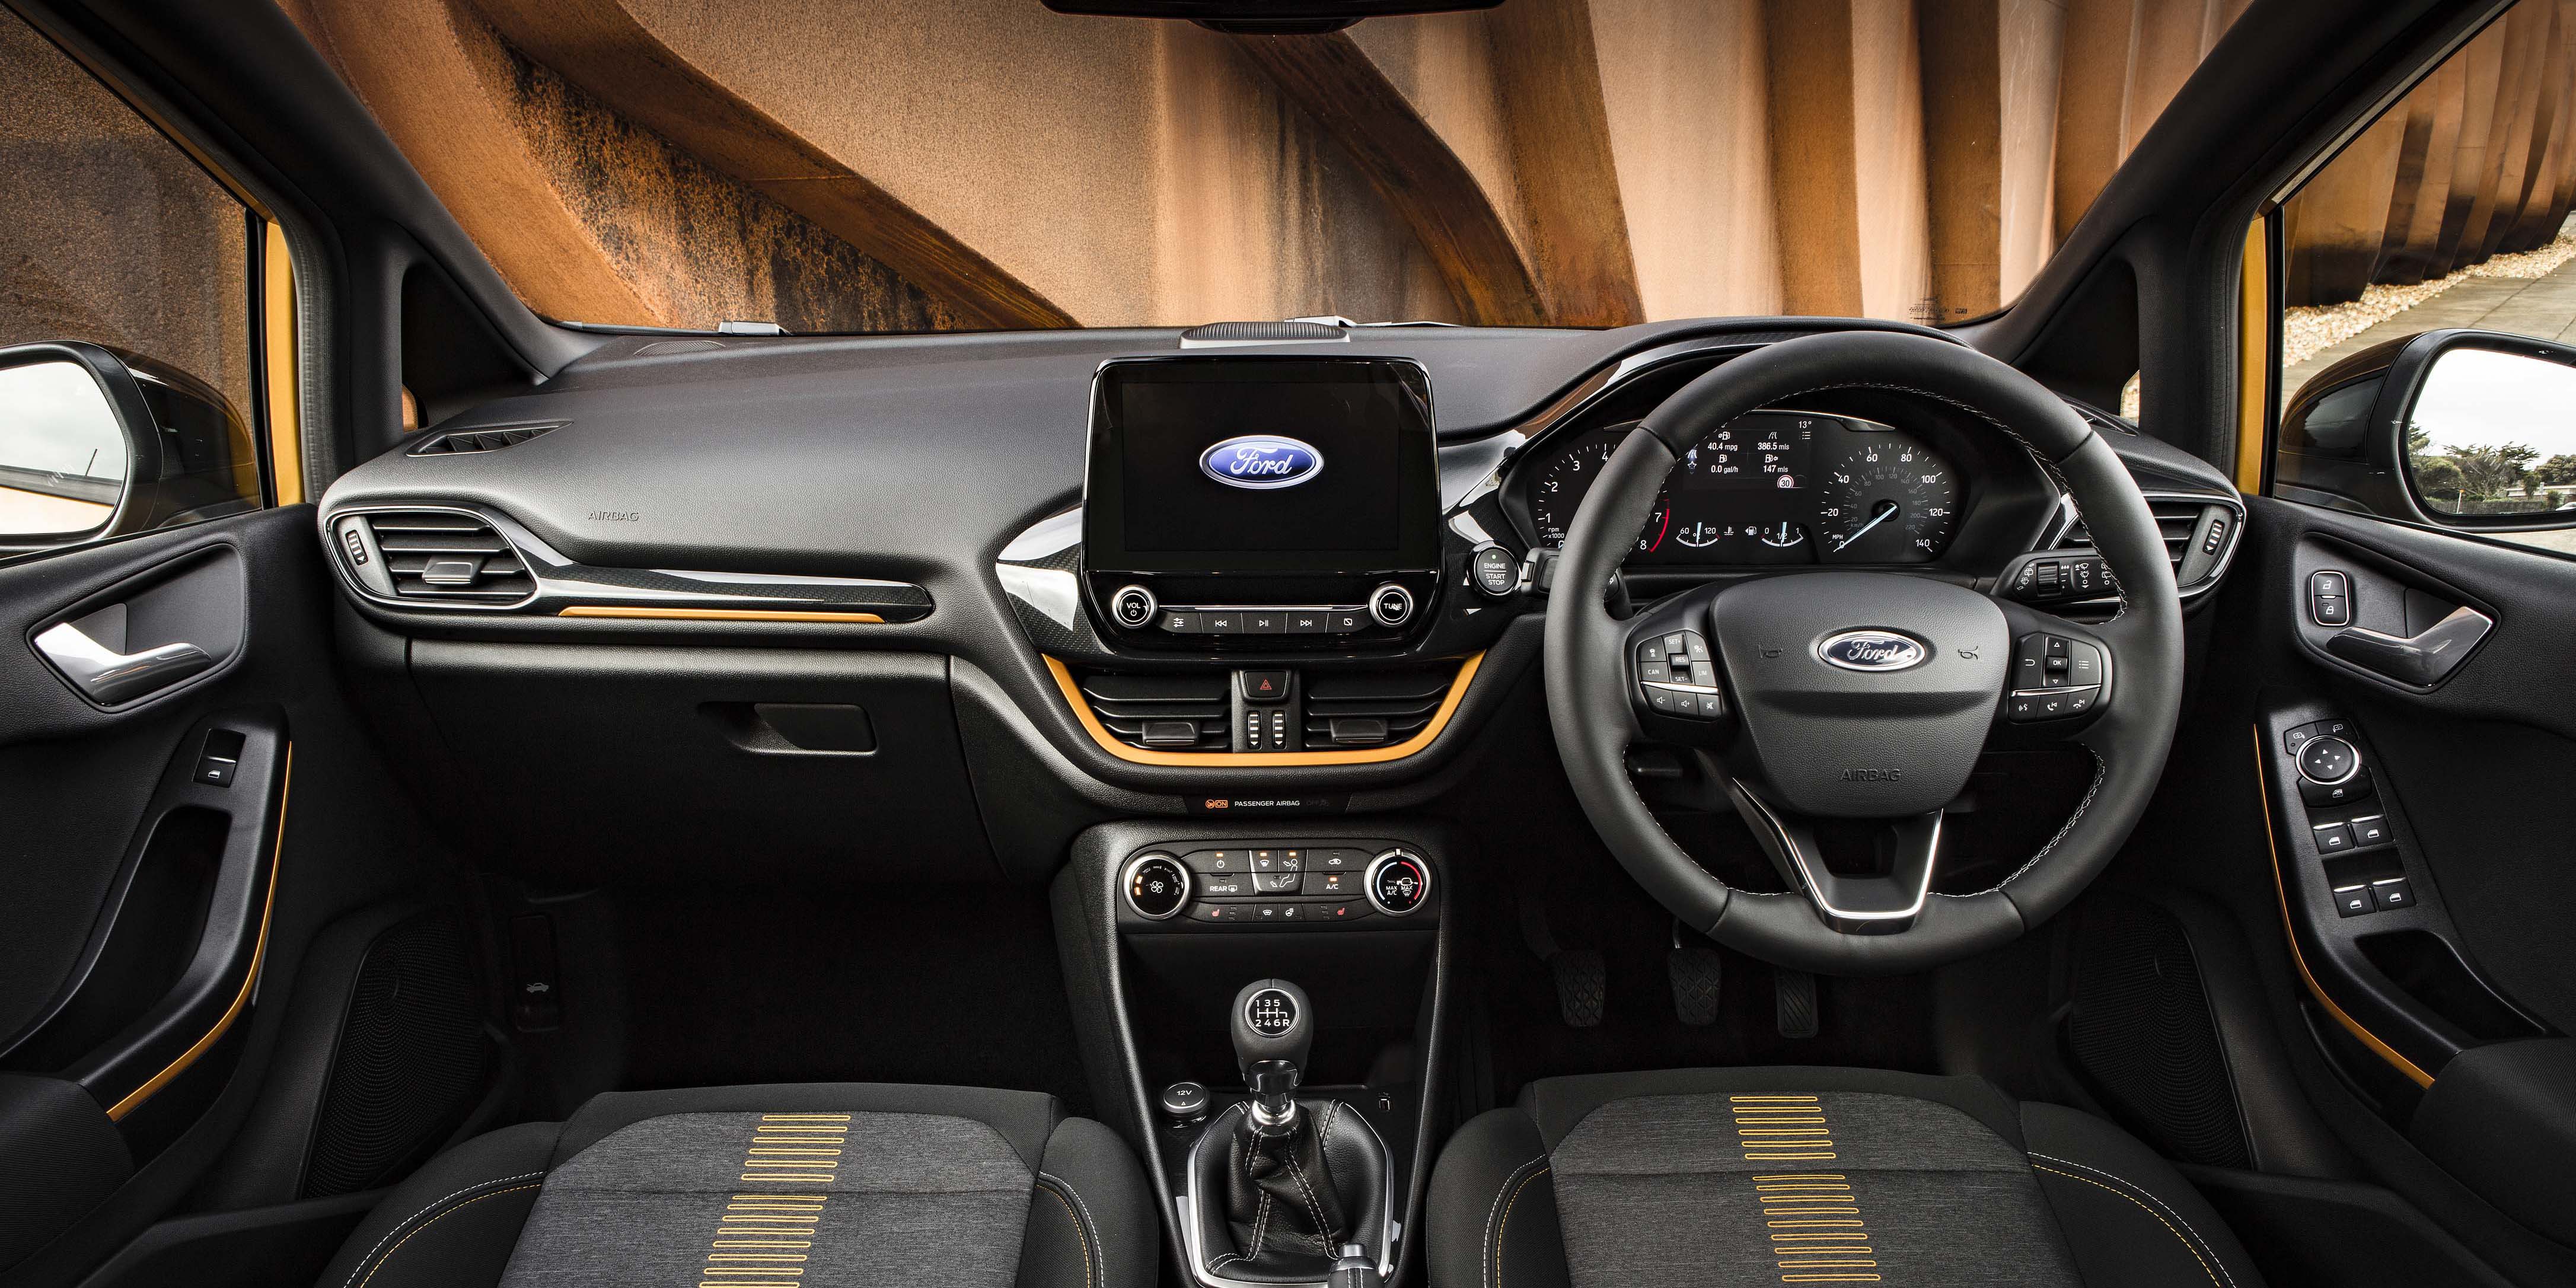 Ford Fiesta Active Interior Infotainment Carwow